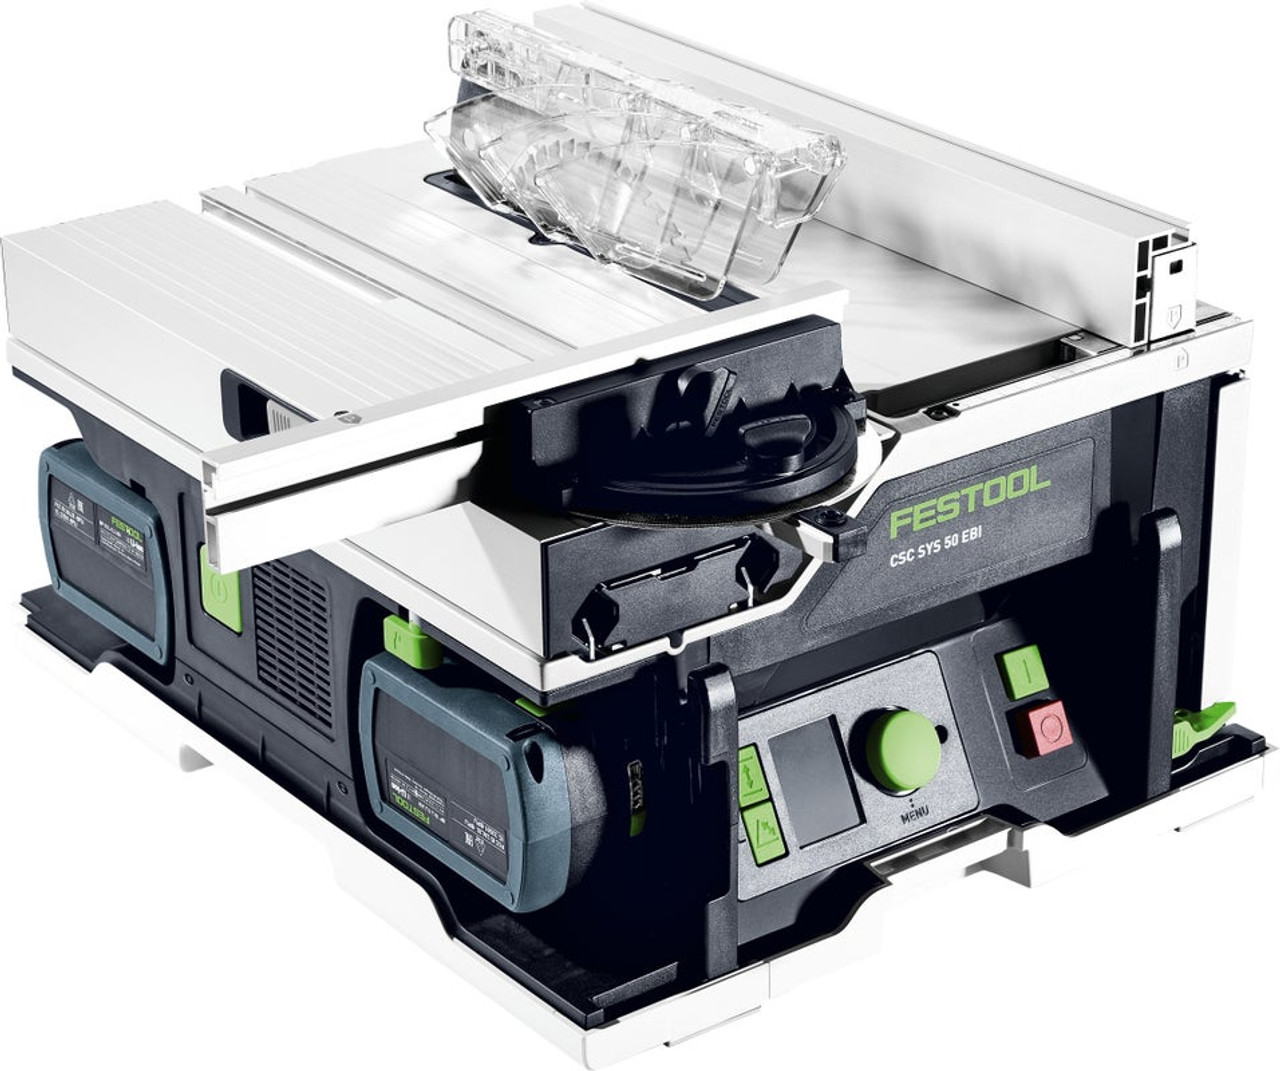 Close-up shot of Festool's new CSC SYS 50 Cordless Table Saw